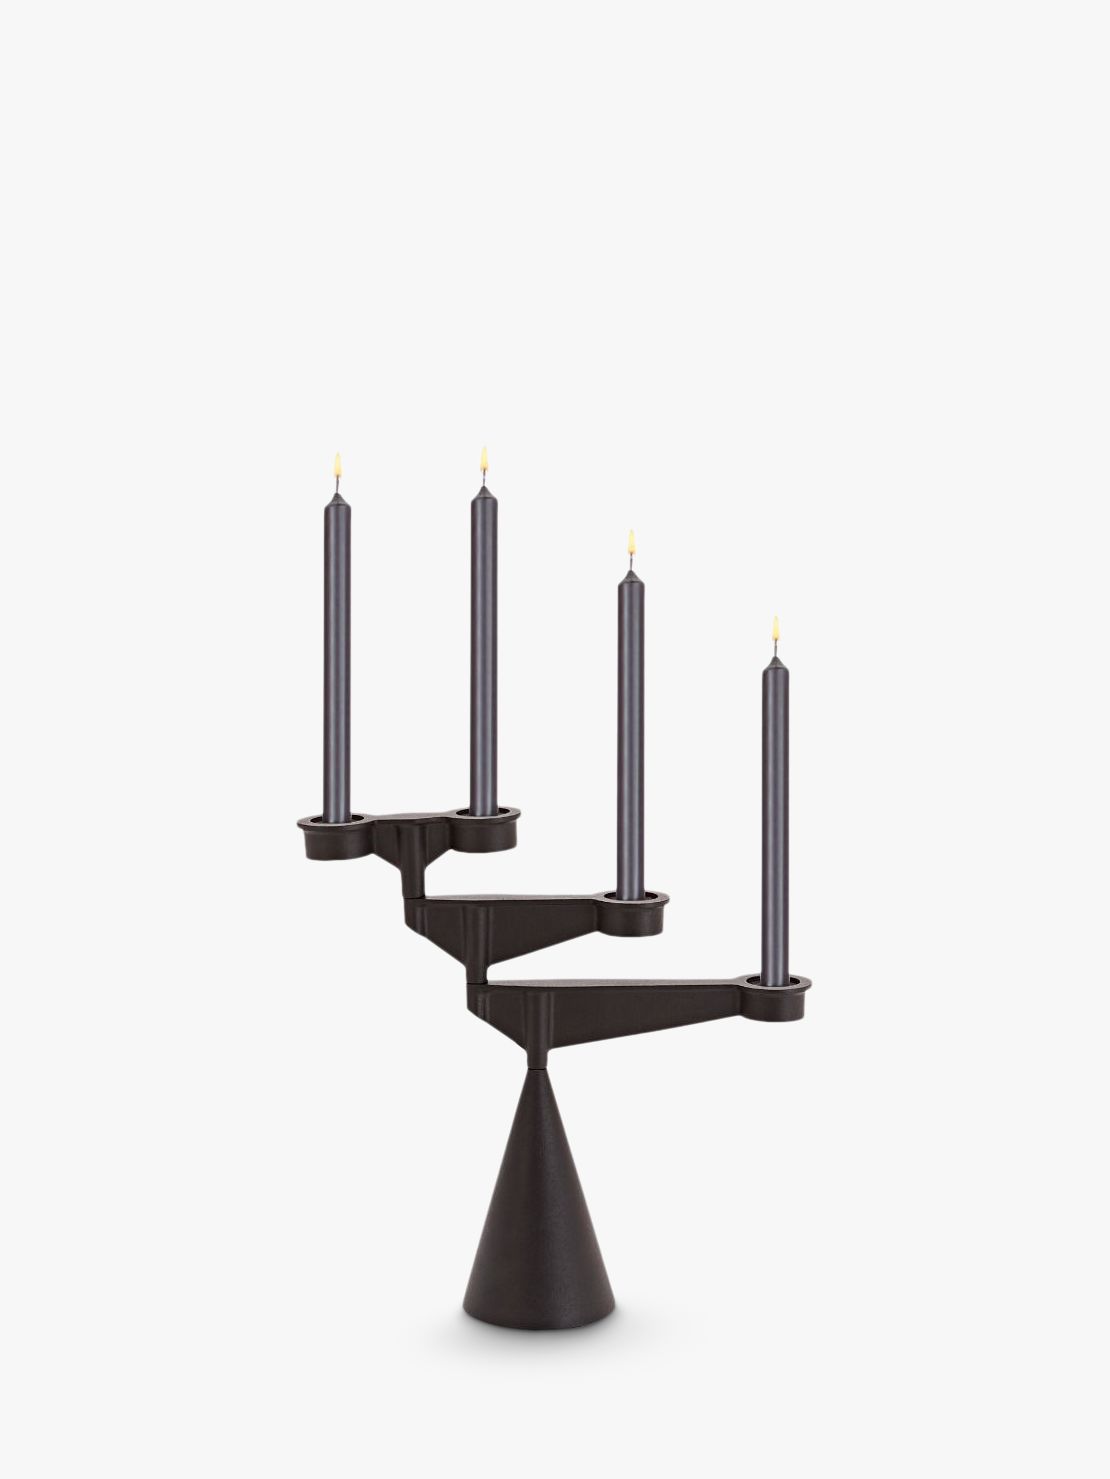 Tom Dixon Spin Candleabra